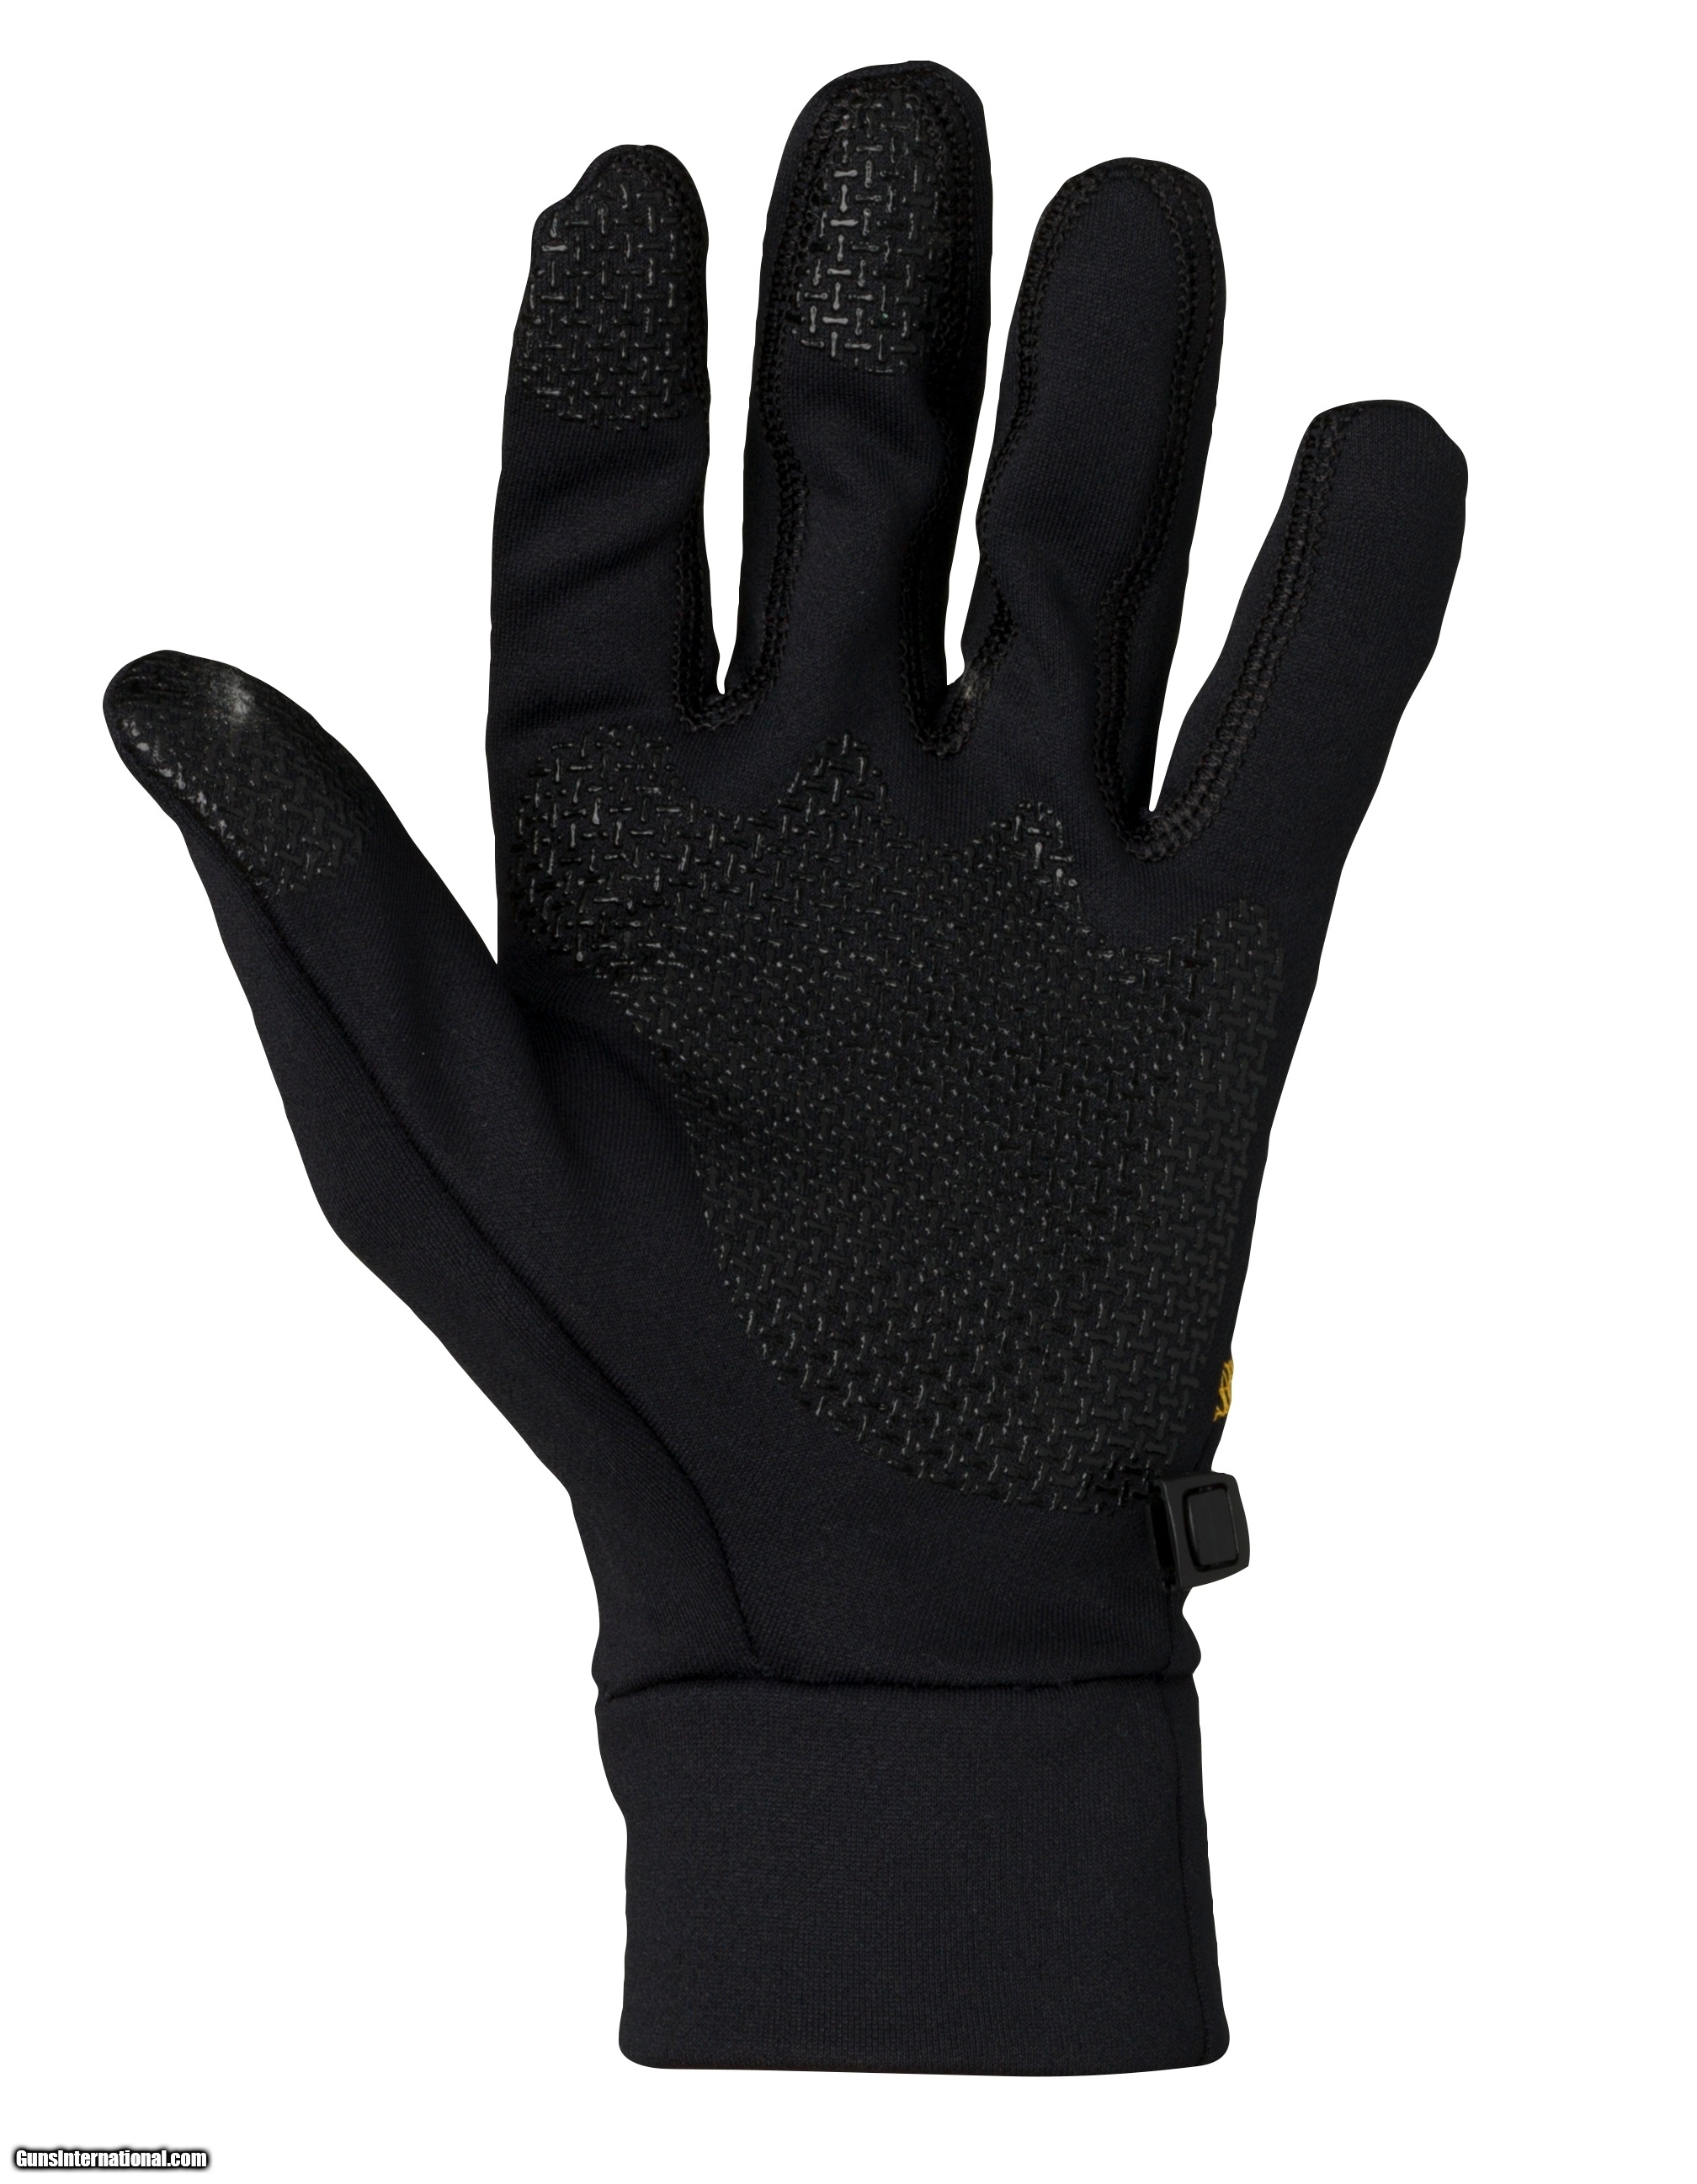 TEAM BROWNING ACC SHOOTING GLOVES S INV 3070159904